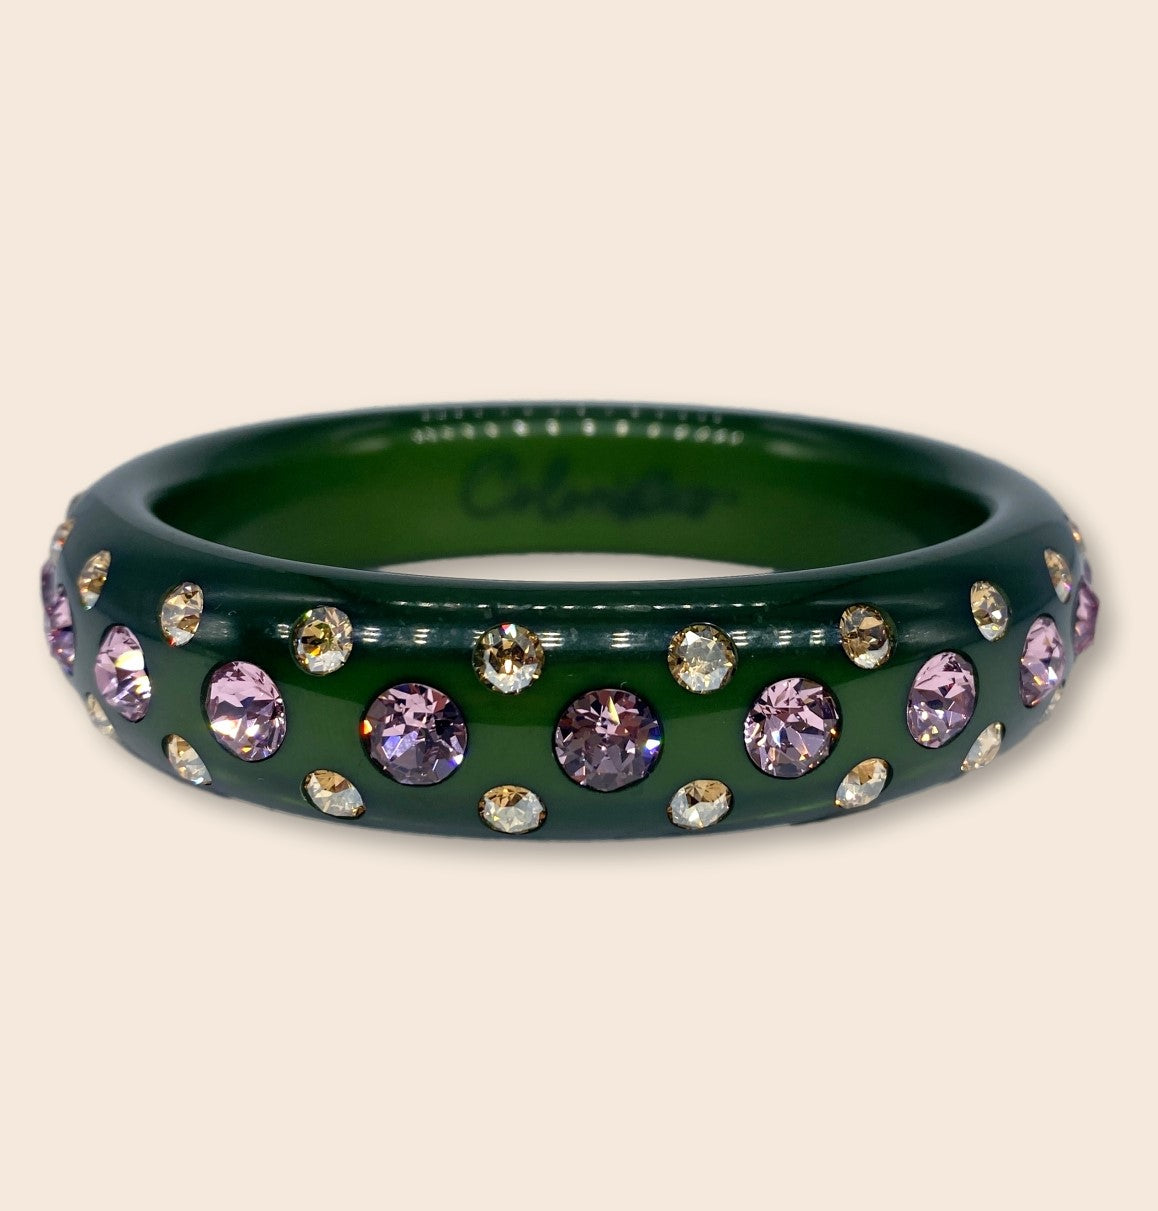 Coloristers Armreifen mit Kristallen in khaki und lila. Coloristers Bangle with crystals in khaki and purple.